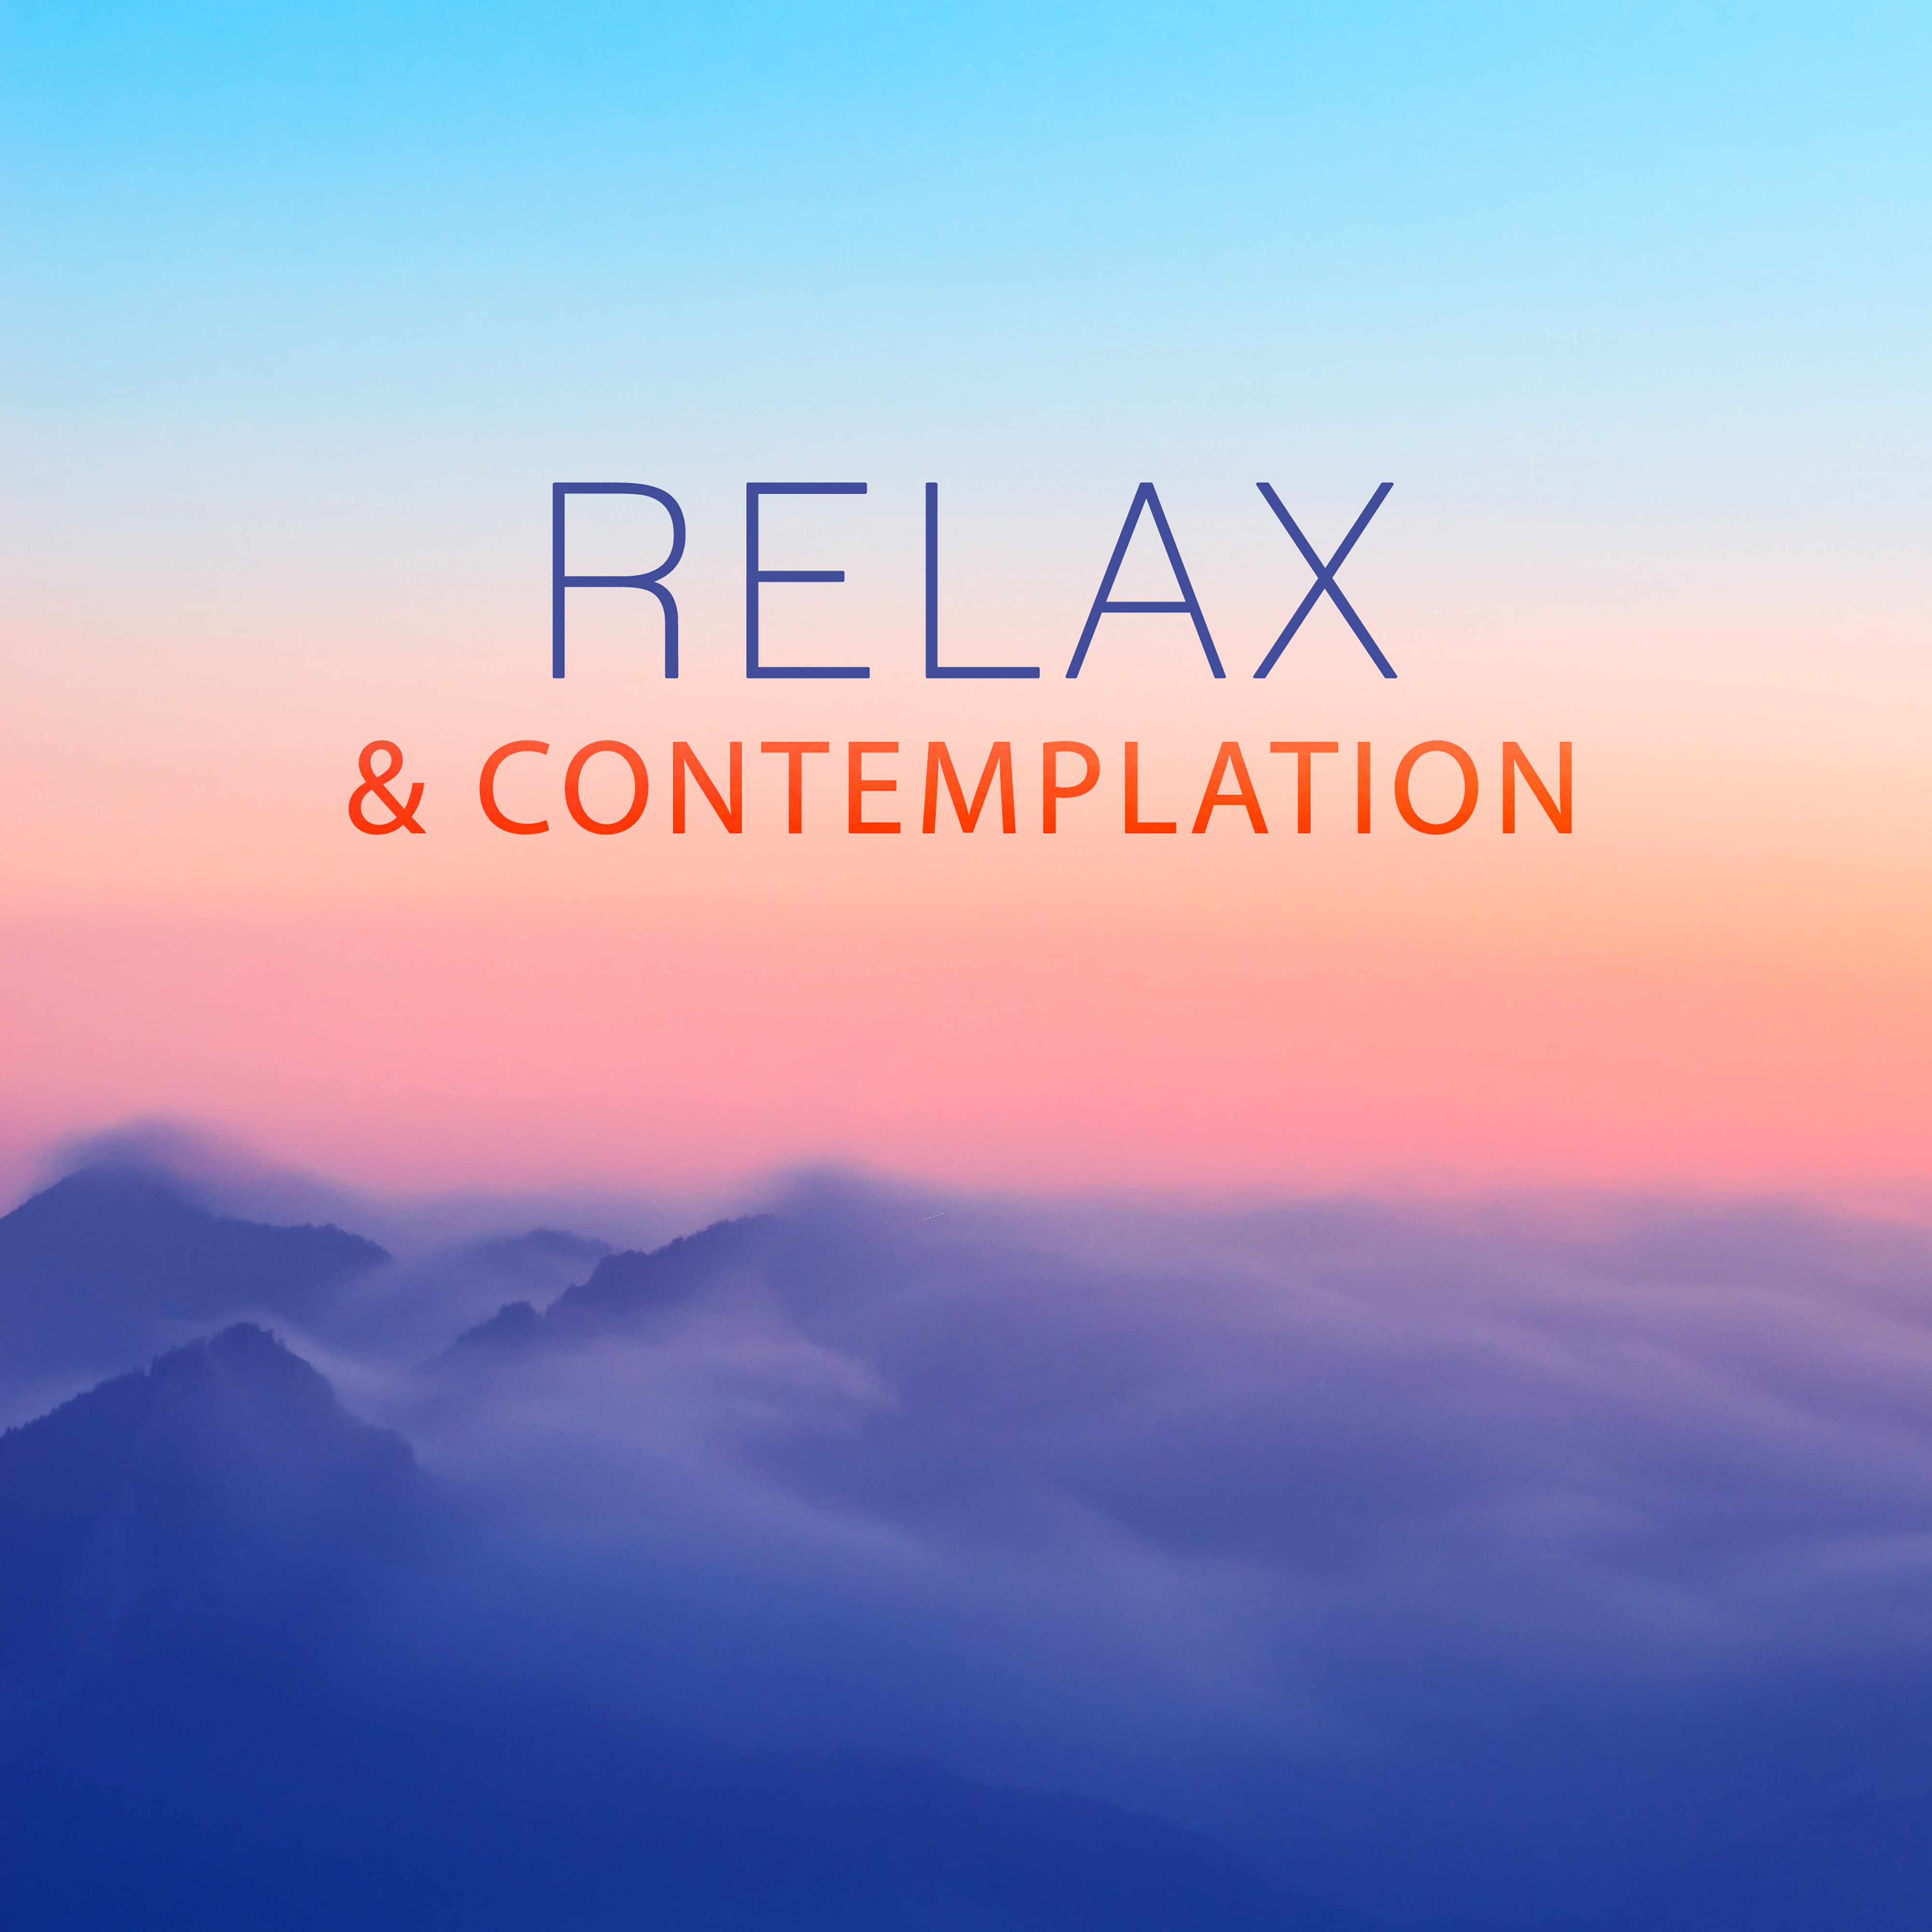 Relax & Contemplation – Nature Sounds for Relaxation, Stress Relief, Calm Mind, Birds Singing, Relaxing Waves, Meditation